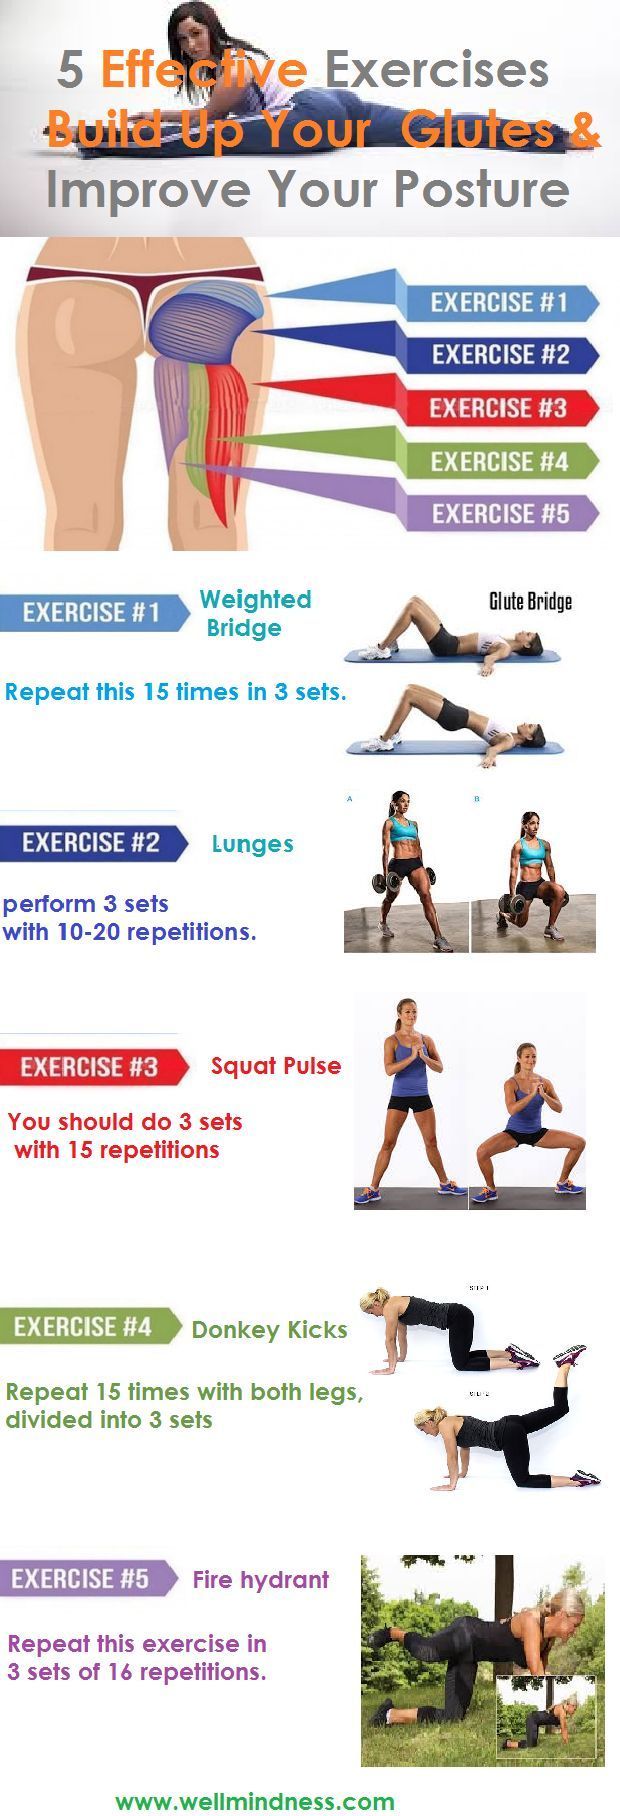 By strengthening the glutes, you will be able to perform high-intensity activities and exercises, and they will also be extremely